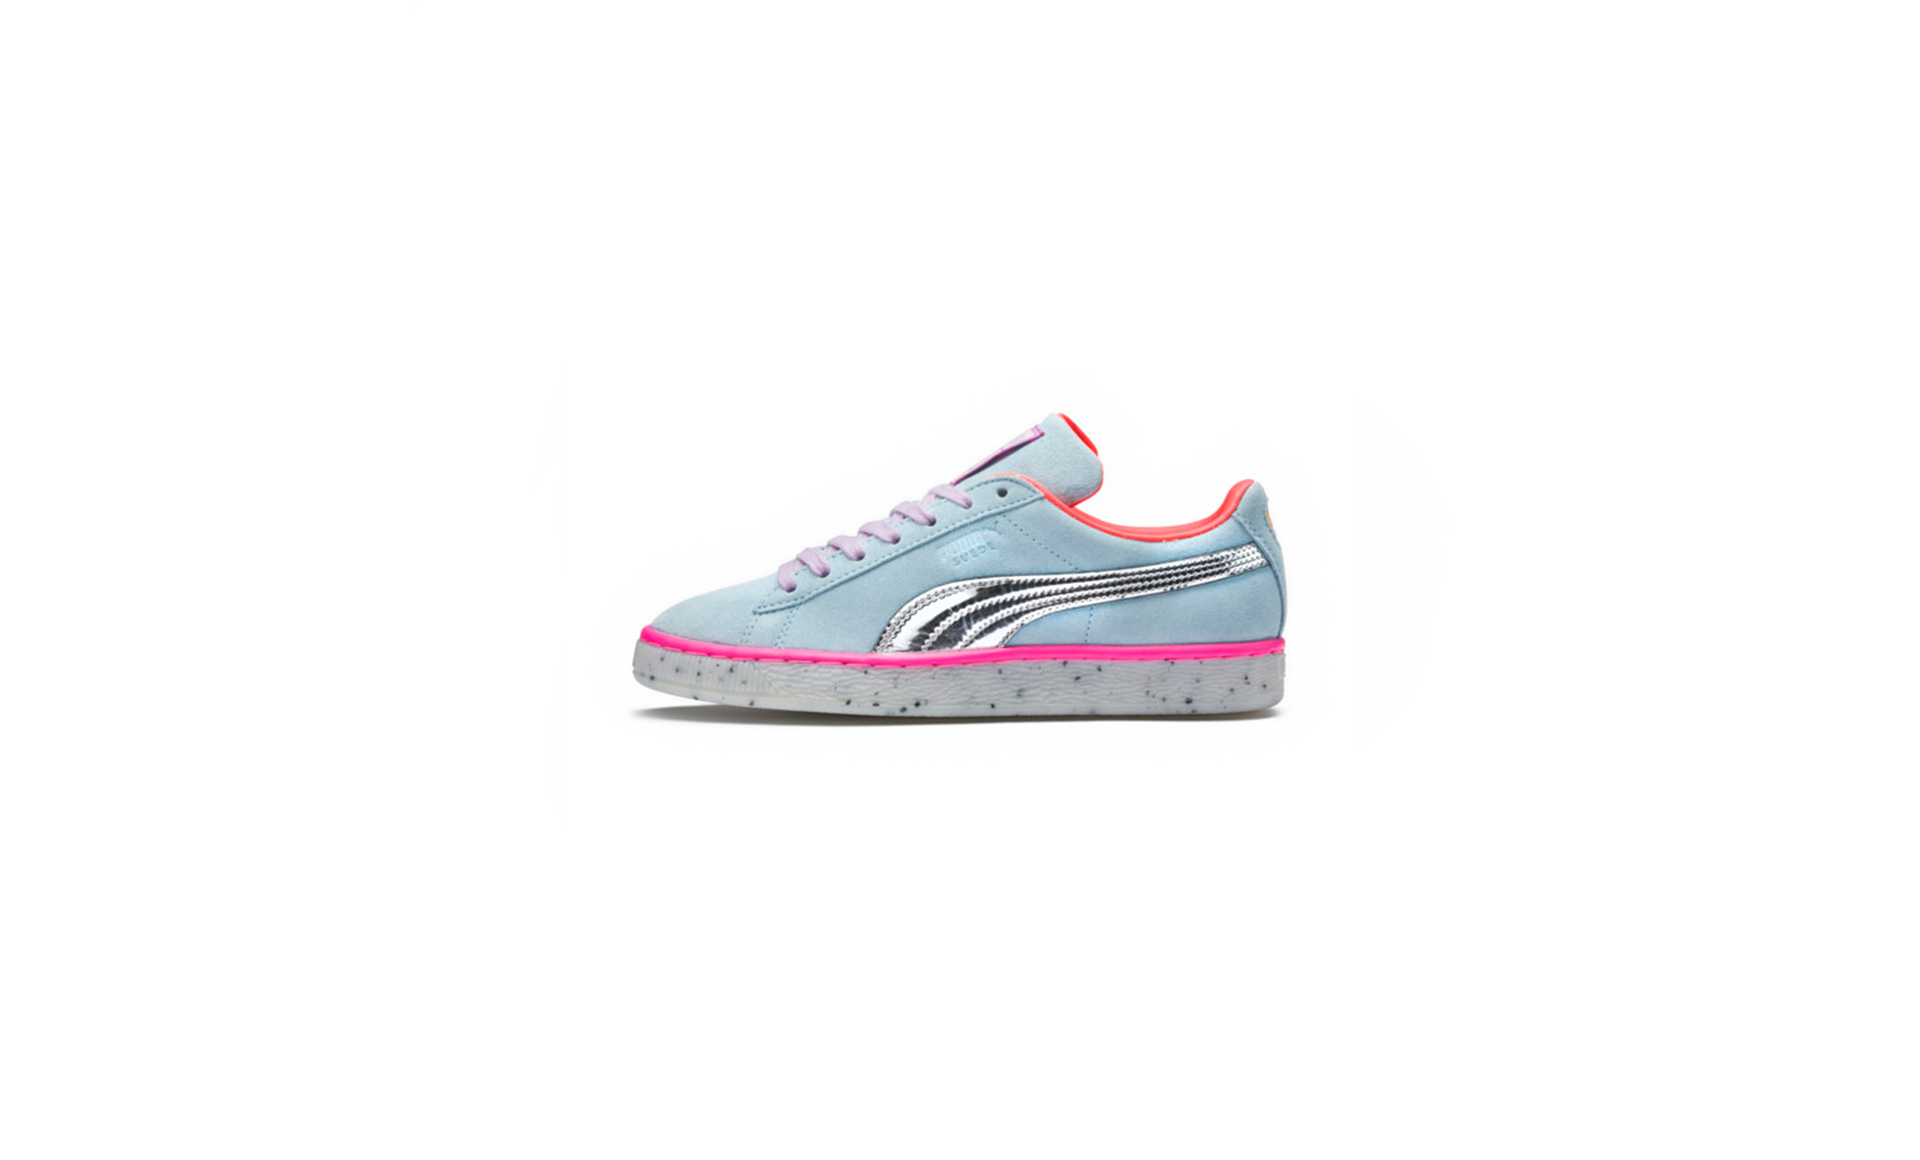 PUMA x SELECT Sophia Webster Suede Candy Princess Women’s Sneakers